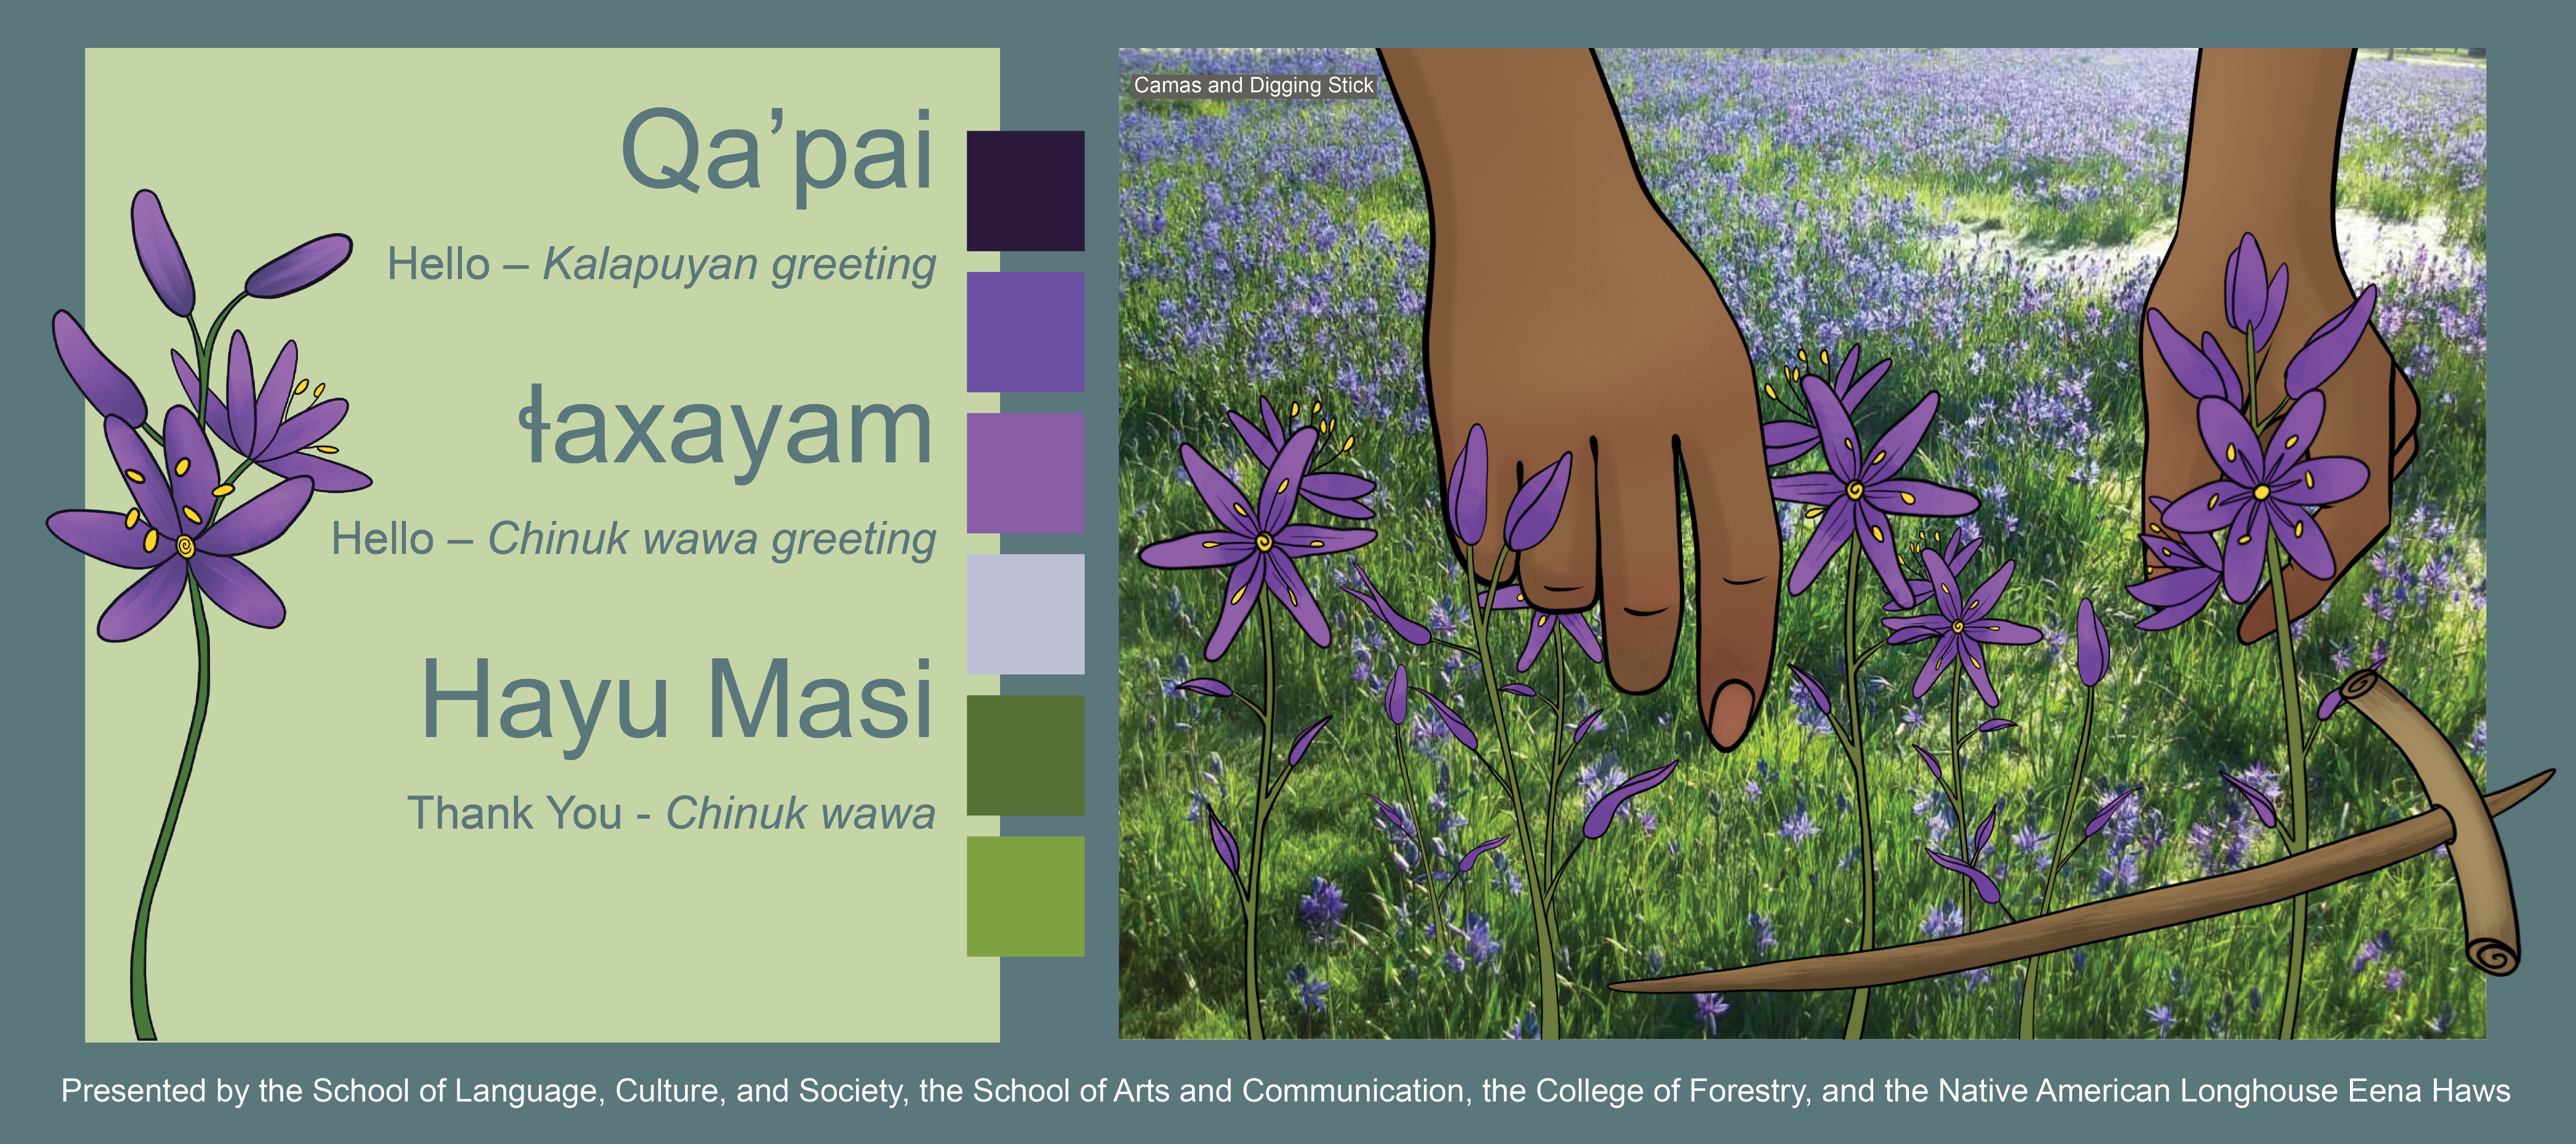 Image showing pair of hands about to pull purple camas flowers, alongside various Indigenous translations of Hello and Thank You.